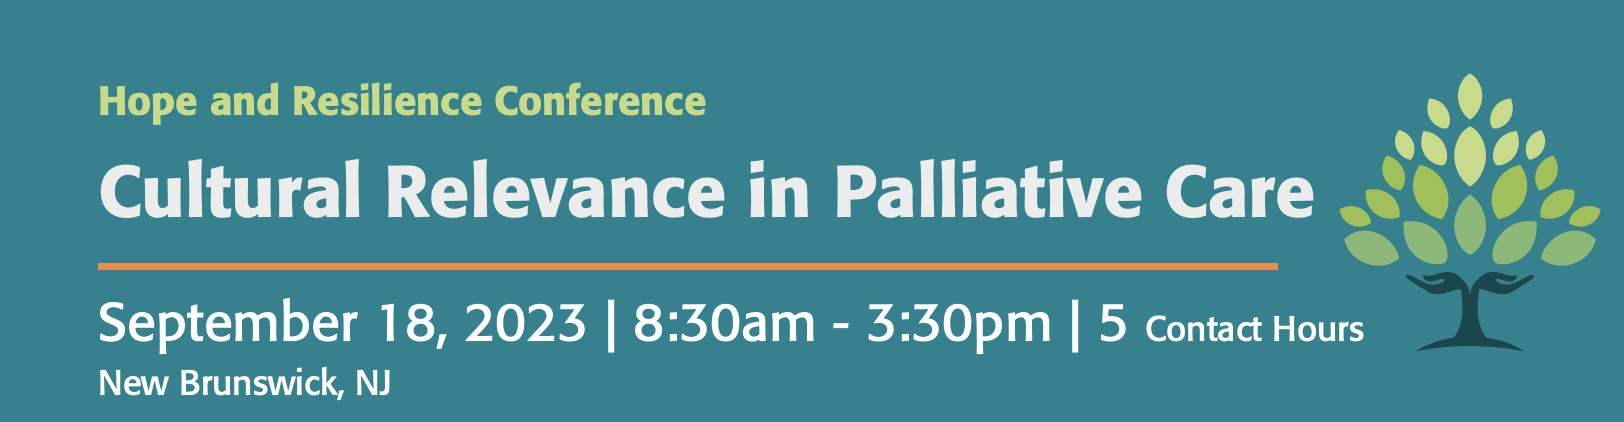 Hope and Resilience: Cultural Relevance in Palliative Care Banner